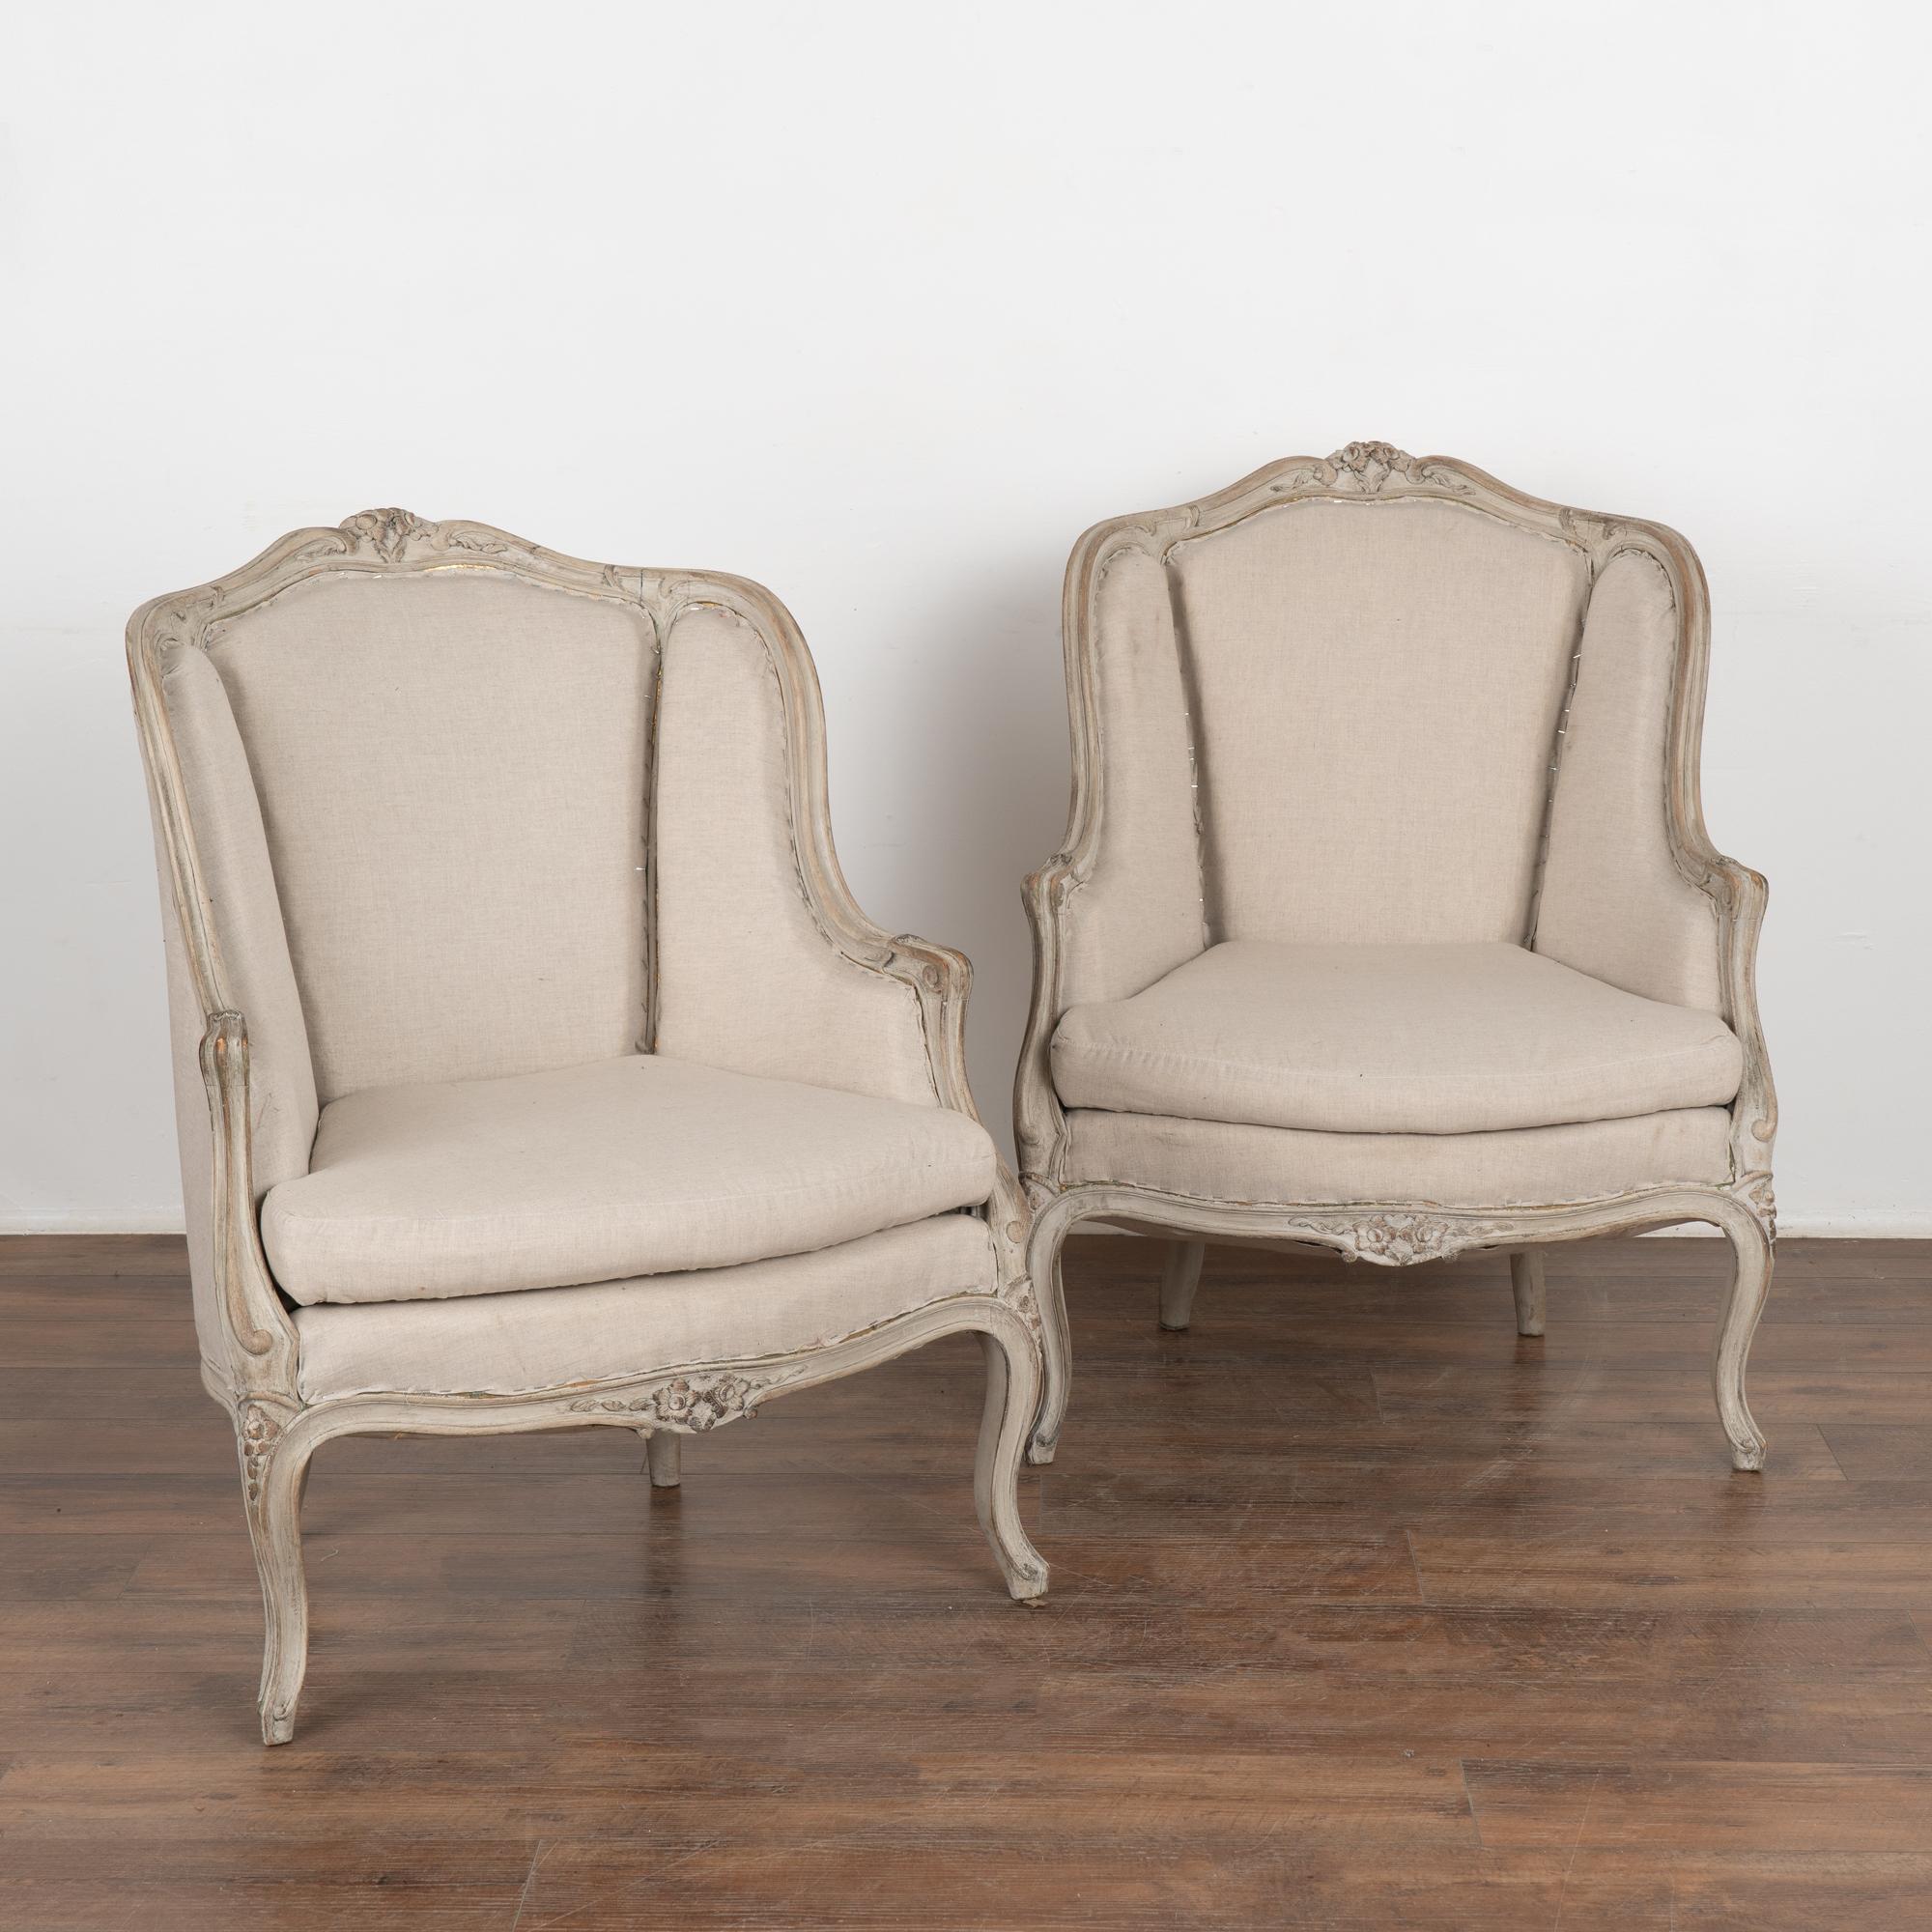 Pair, attractive Swedish country Gustavian style gray painted arm chairs with high backs.
Carved floral details along top and skirt, graceful curved arms, resting on cabriolet legs which combine to create the romantic appeal of this pair. 
The gray